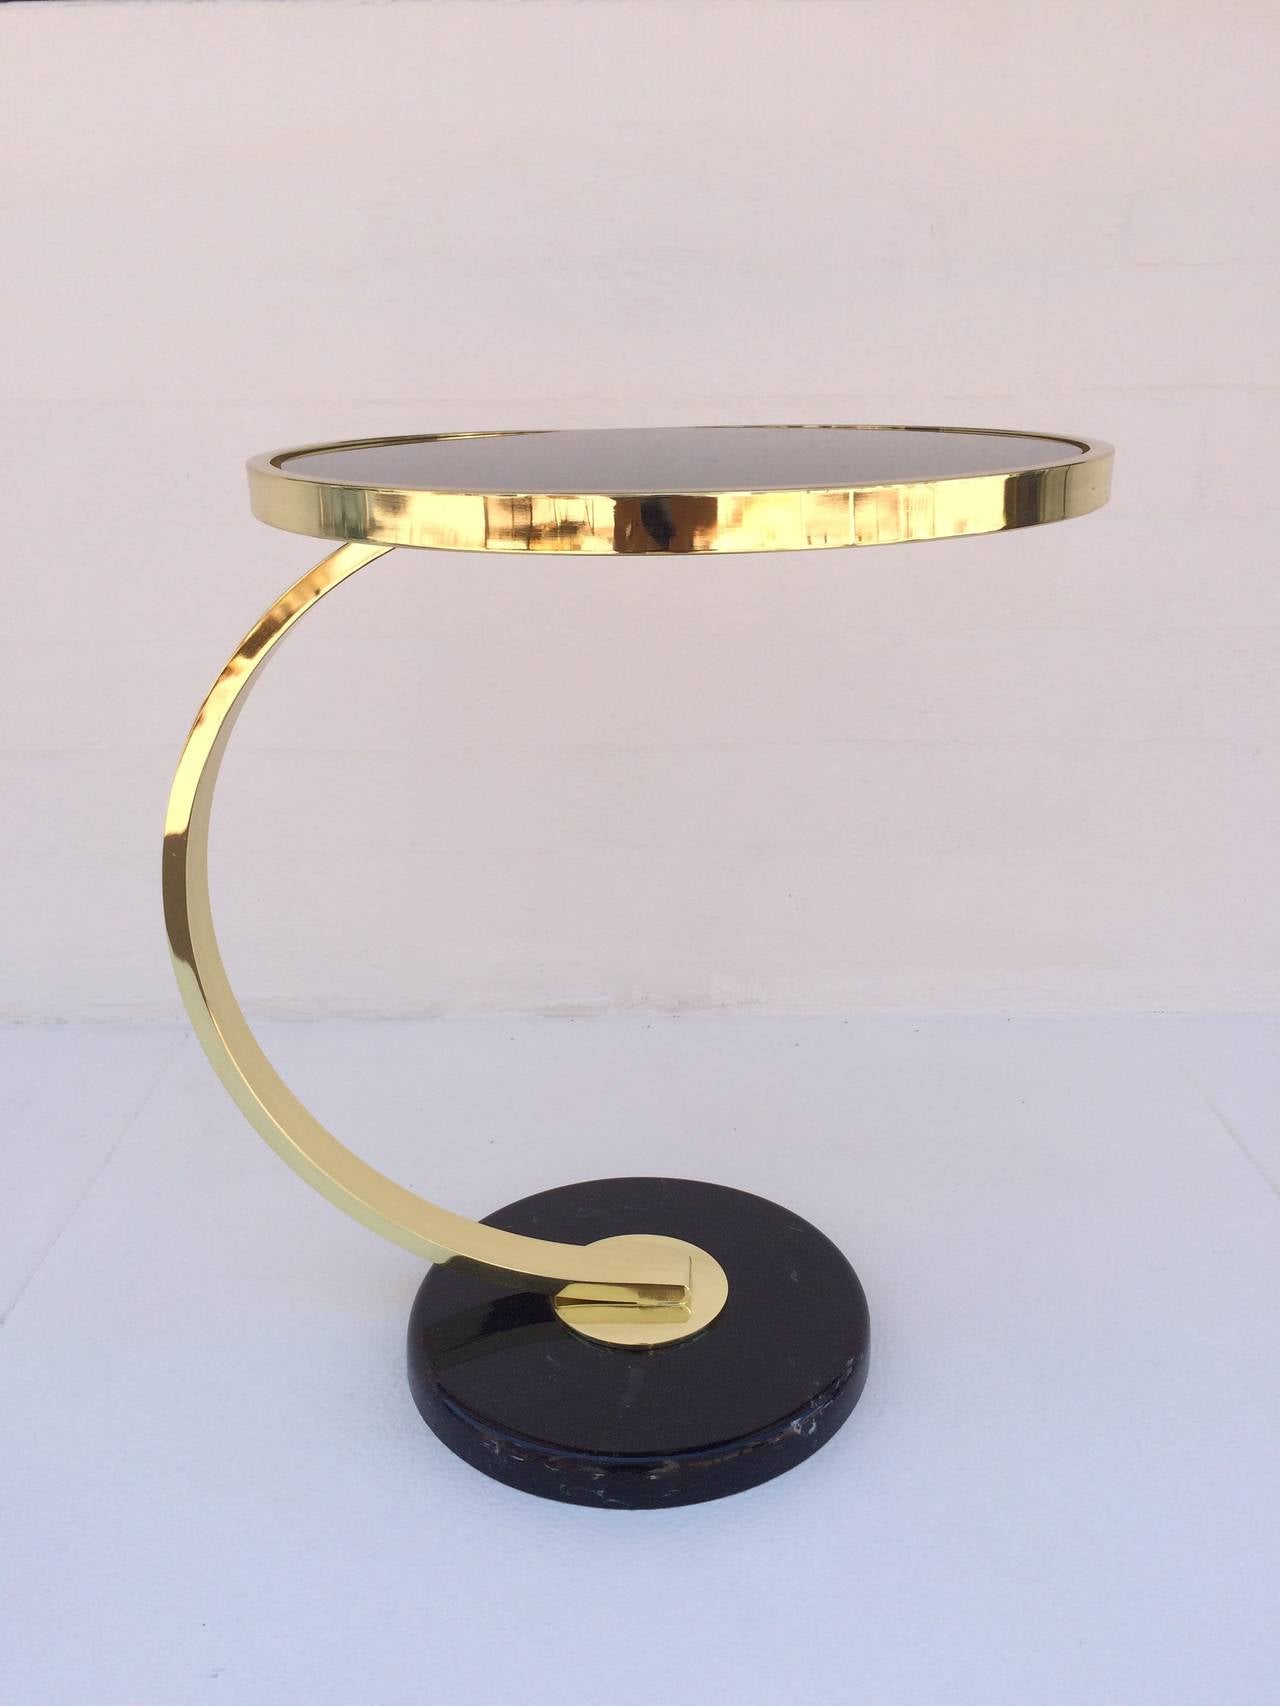 This elegant side table designed by Milo Baughman for Design Institute of America is polished brass with black inset glass and a polished faux marble base.